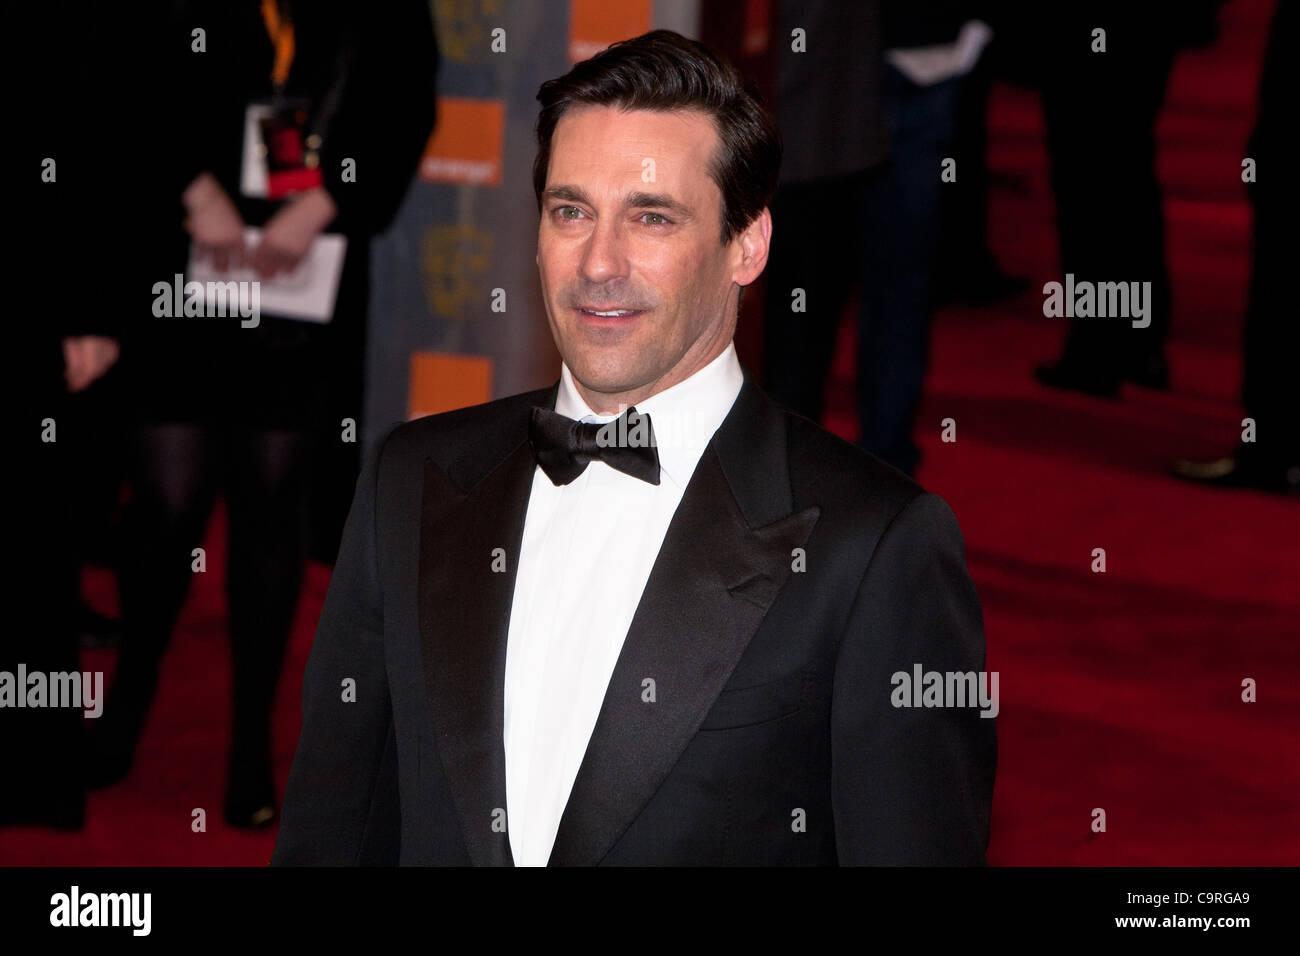 London, UK, 12/02/2012. Actor Jon Hamm, arrive on the red carpet to attend the 2012 BAFTAs Stock Photo